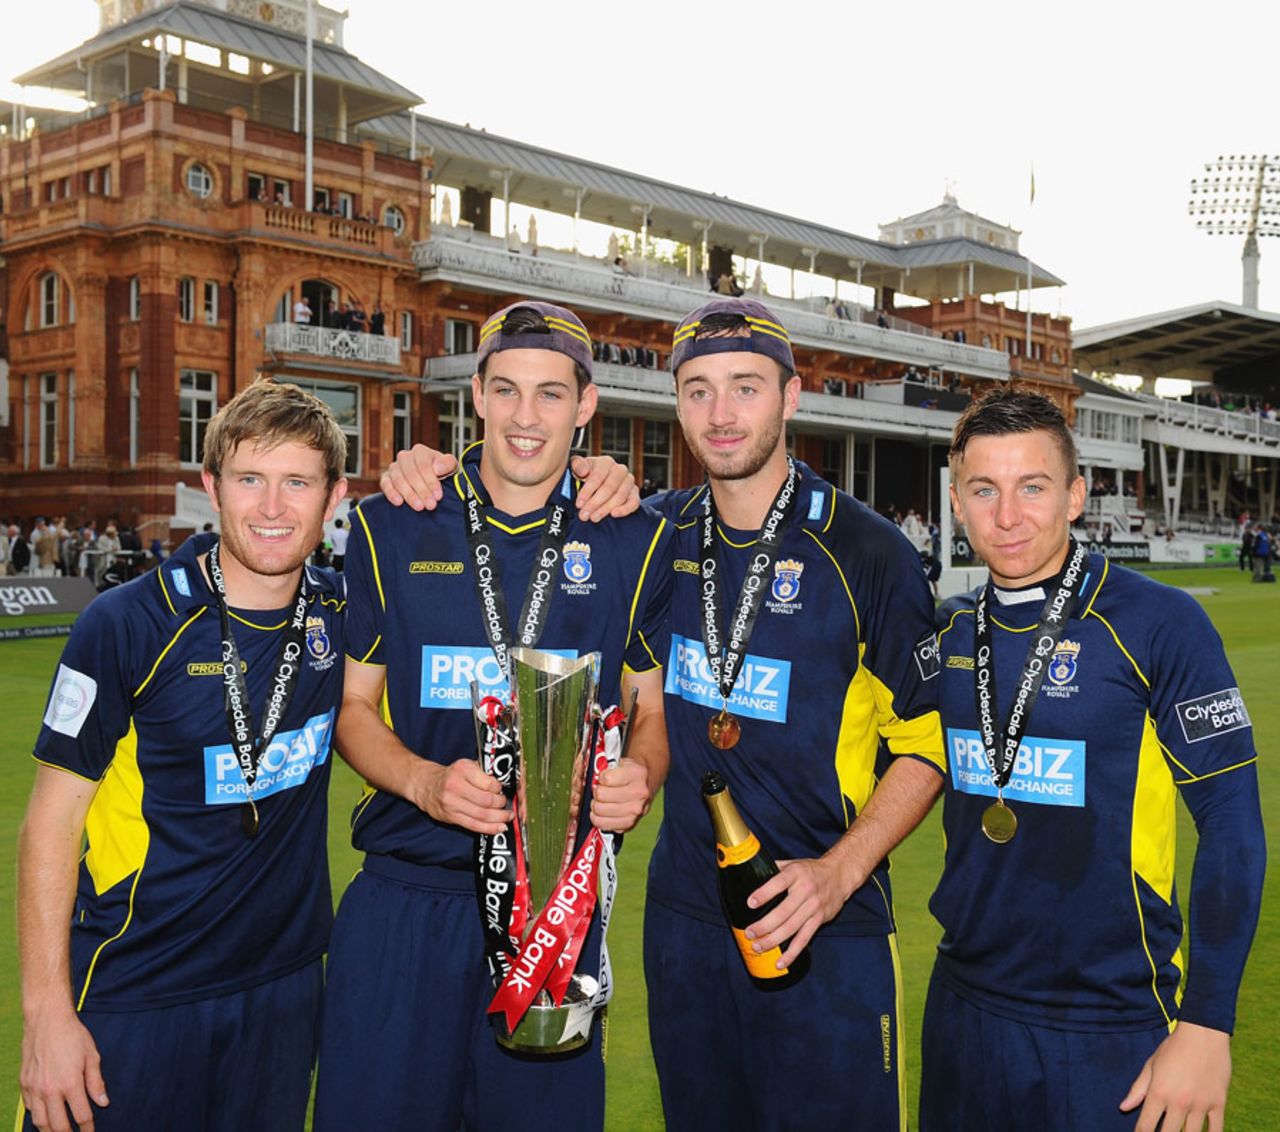 Liam Dawson, Chris Wood, James Vince and Michael Bates pose with the CB40 trophy, Hampshire v Warwickshire, CB40 Final, Lord's, September 15, 2012